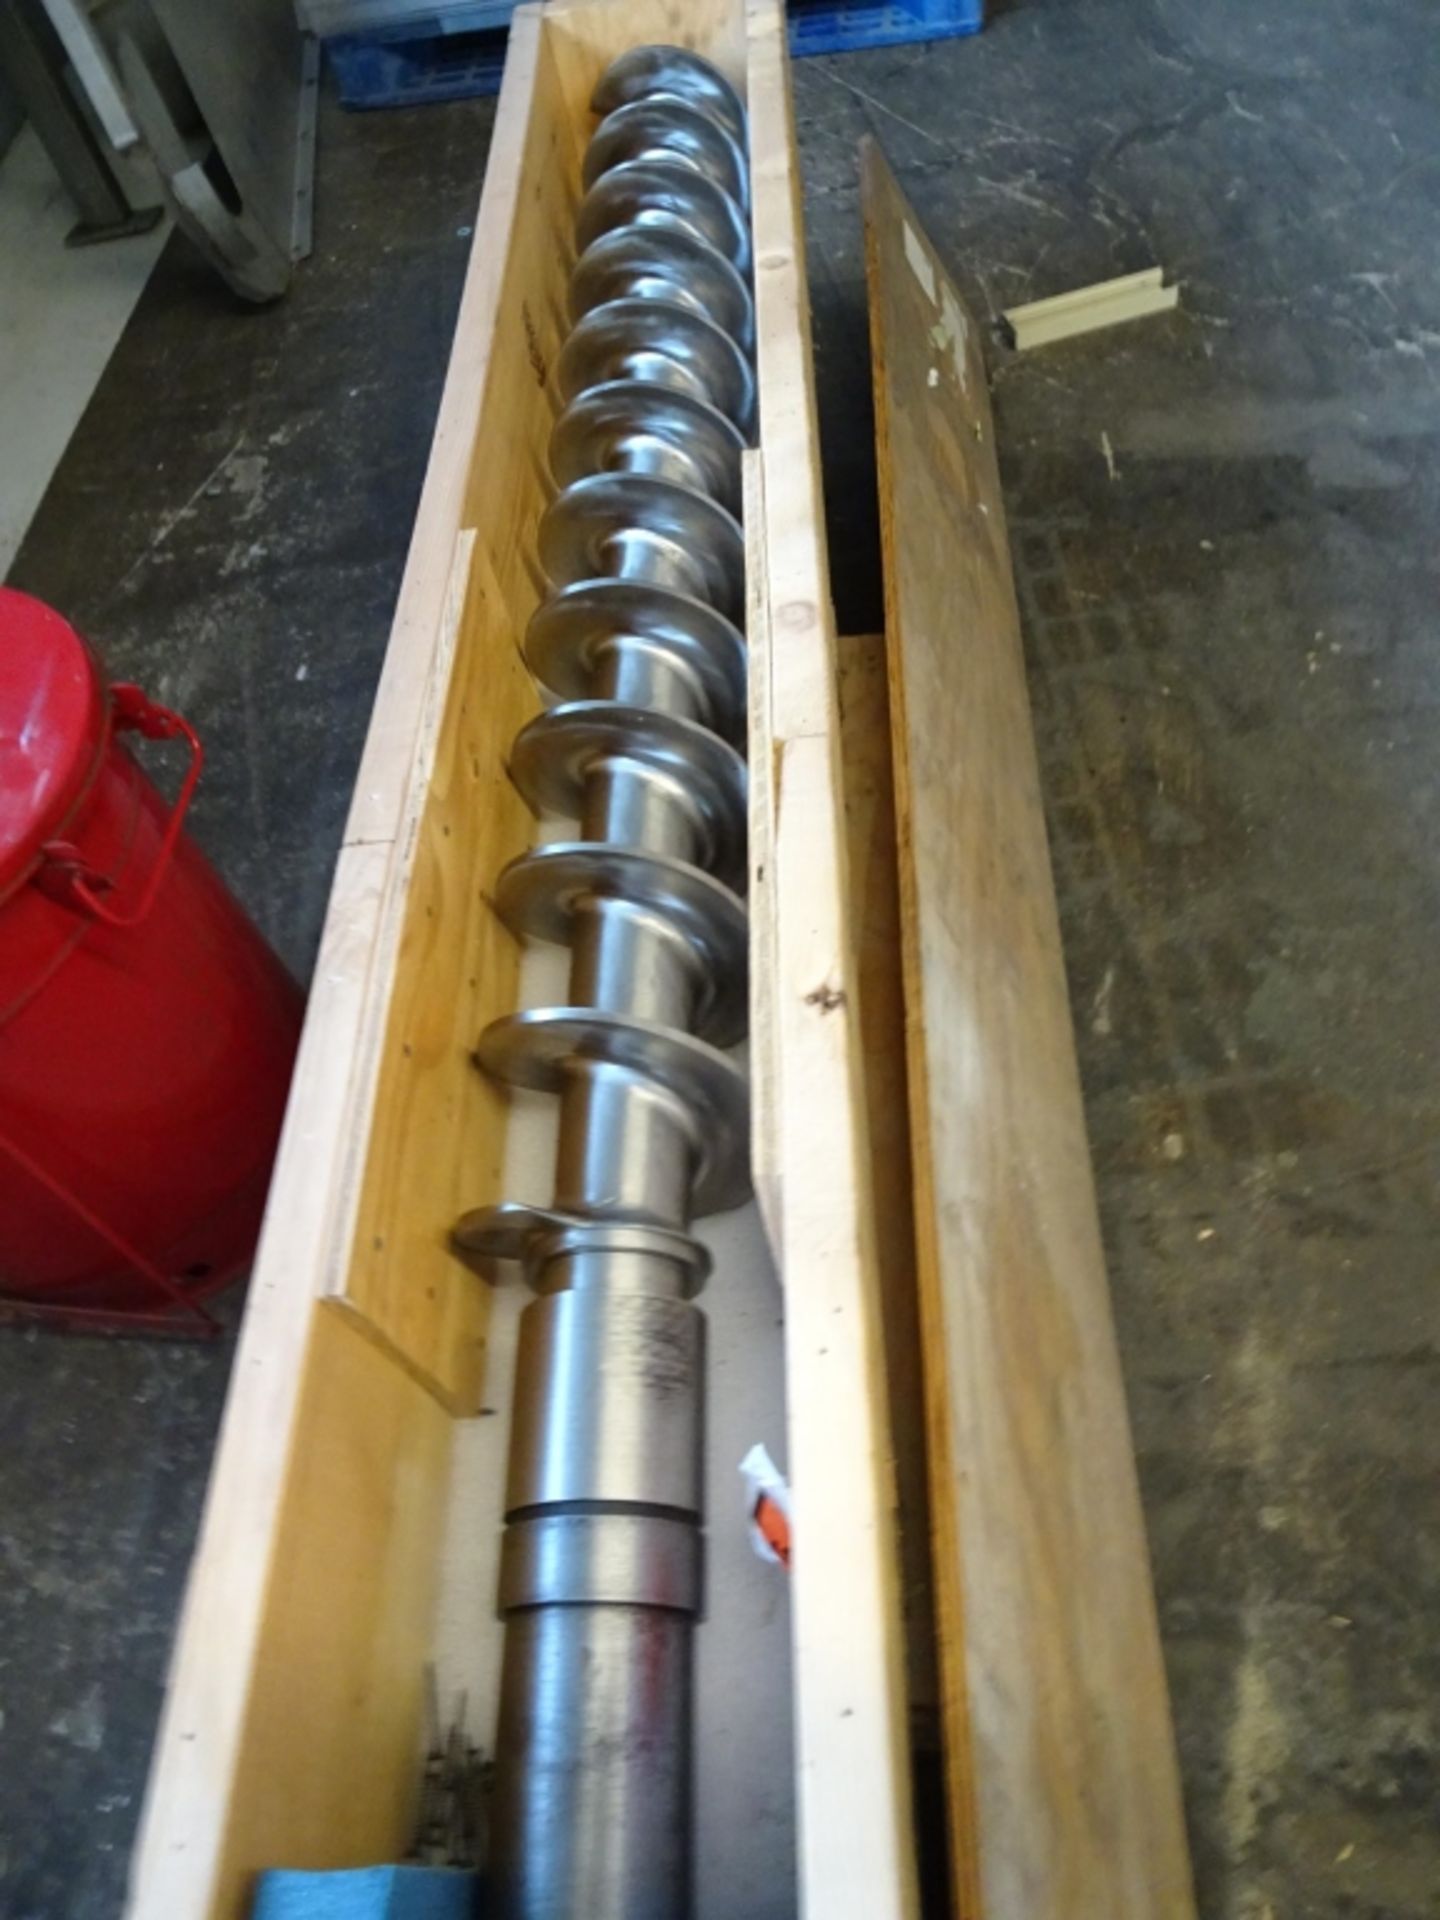 Wenger Stainless Steel Screw - Image 2 of 3